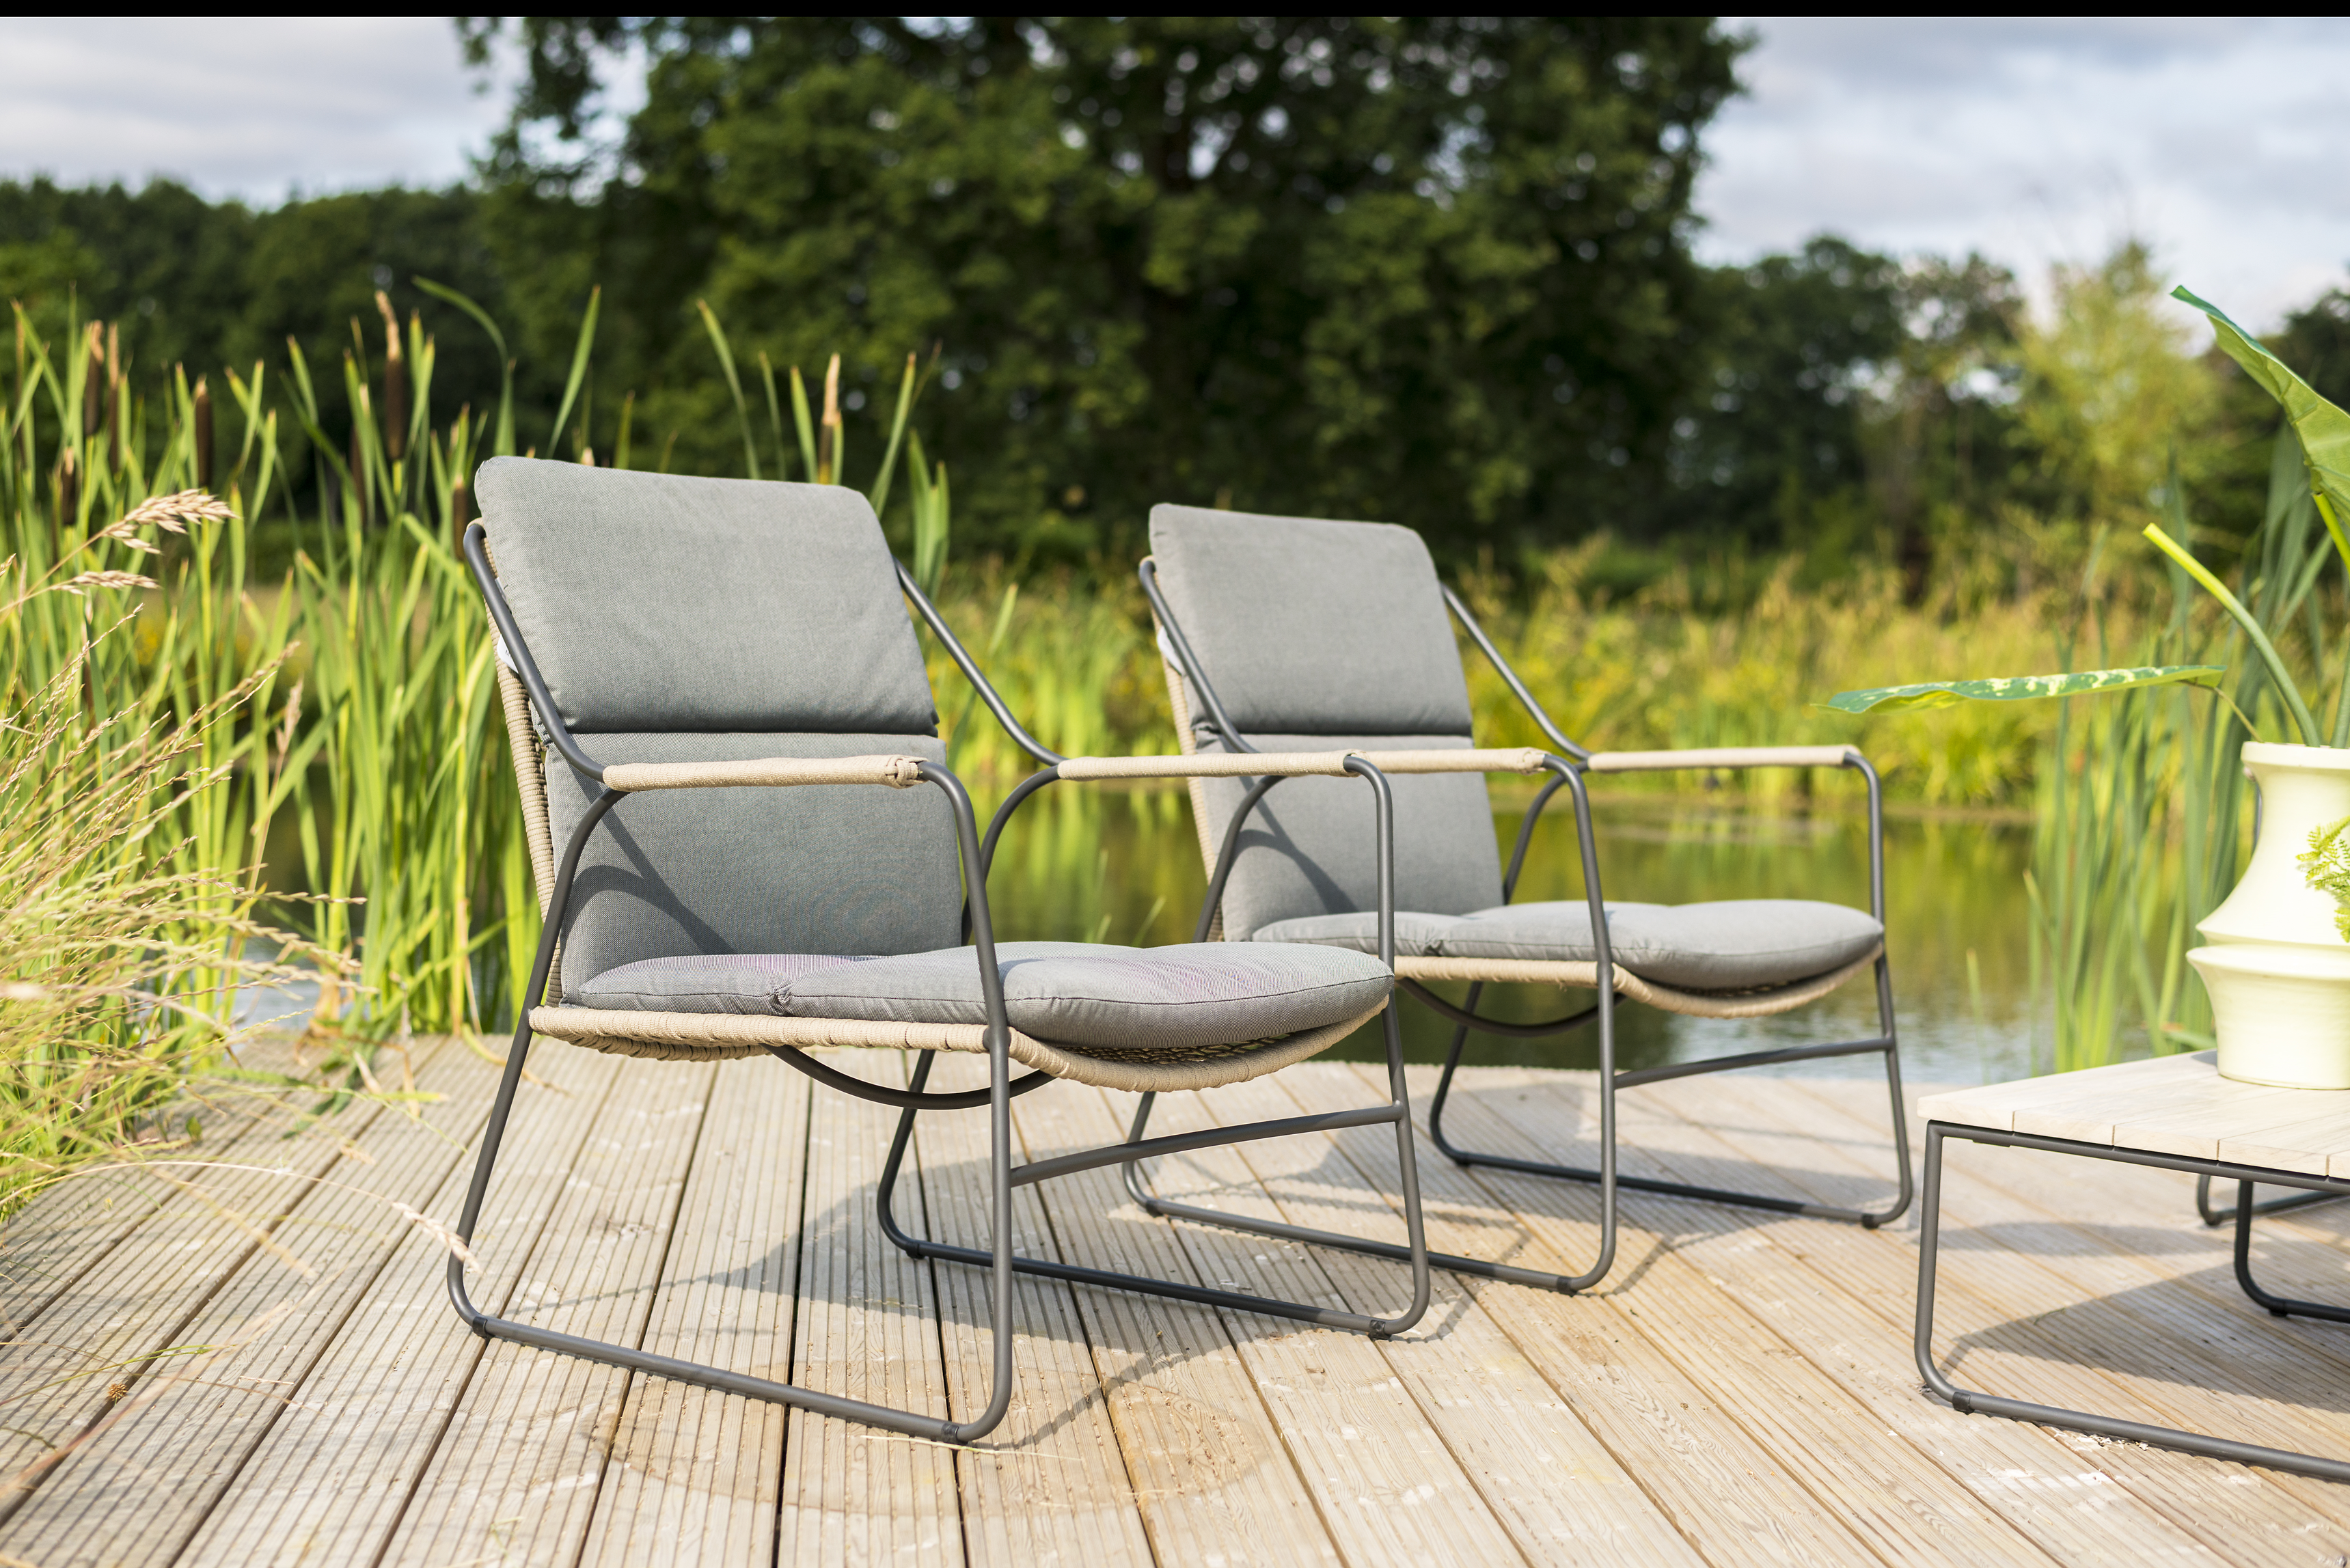 4 Seasons Outdoor Scandic Living Chair With 2 Cushions